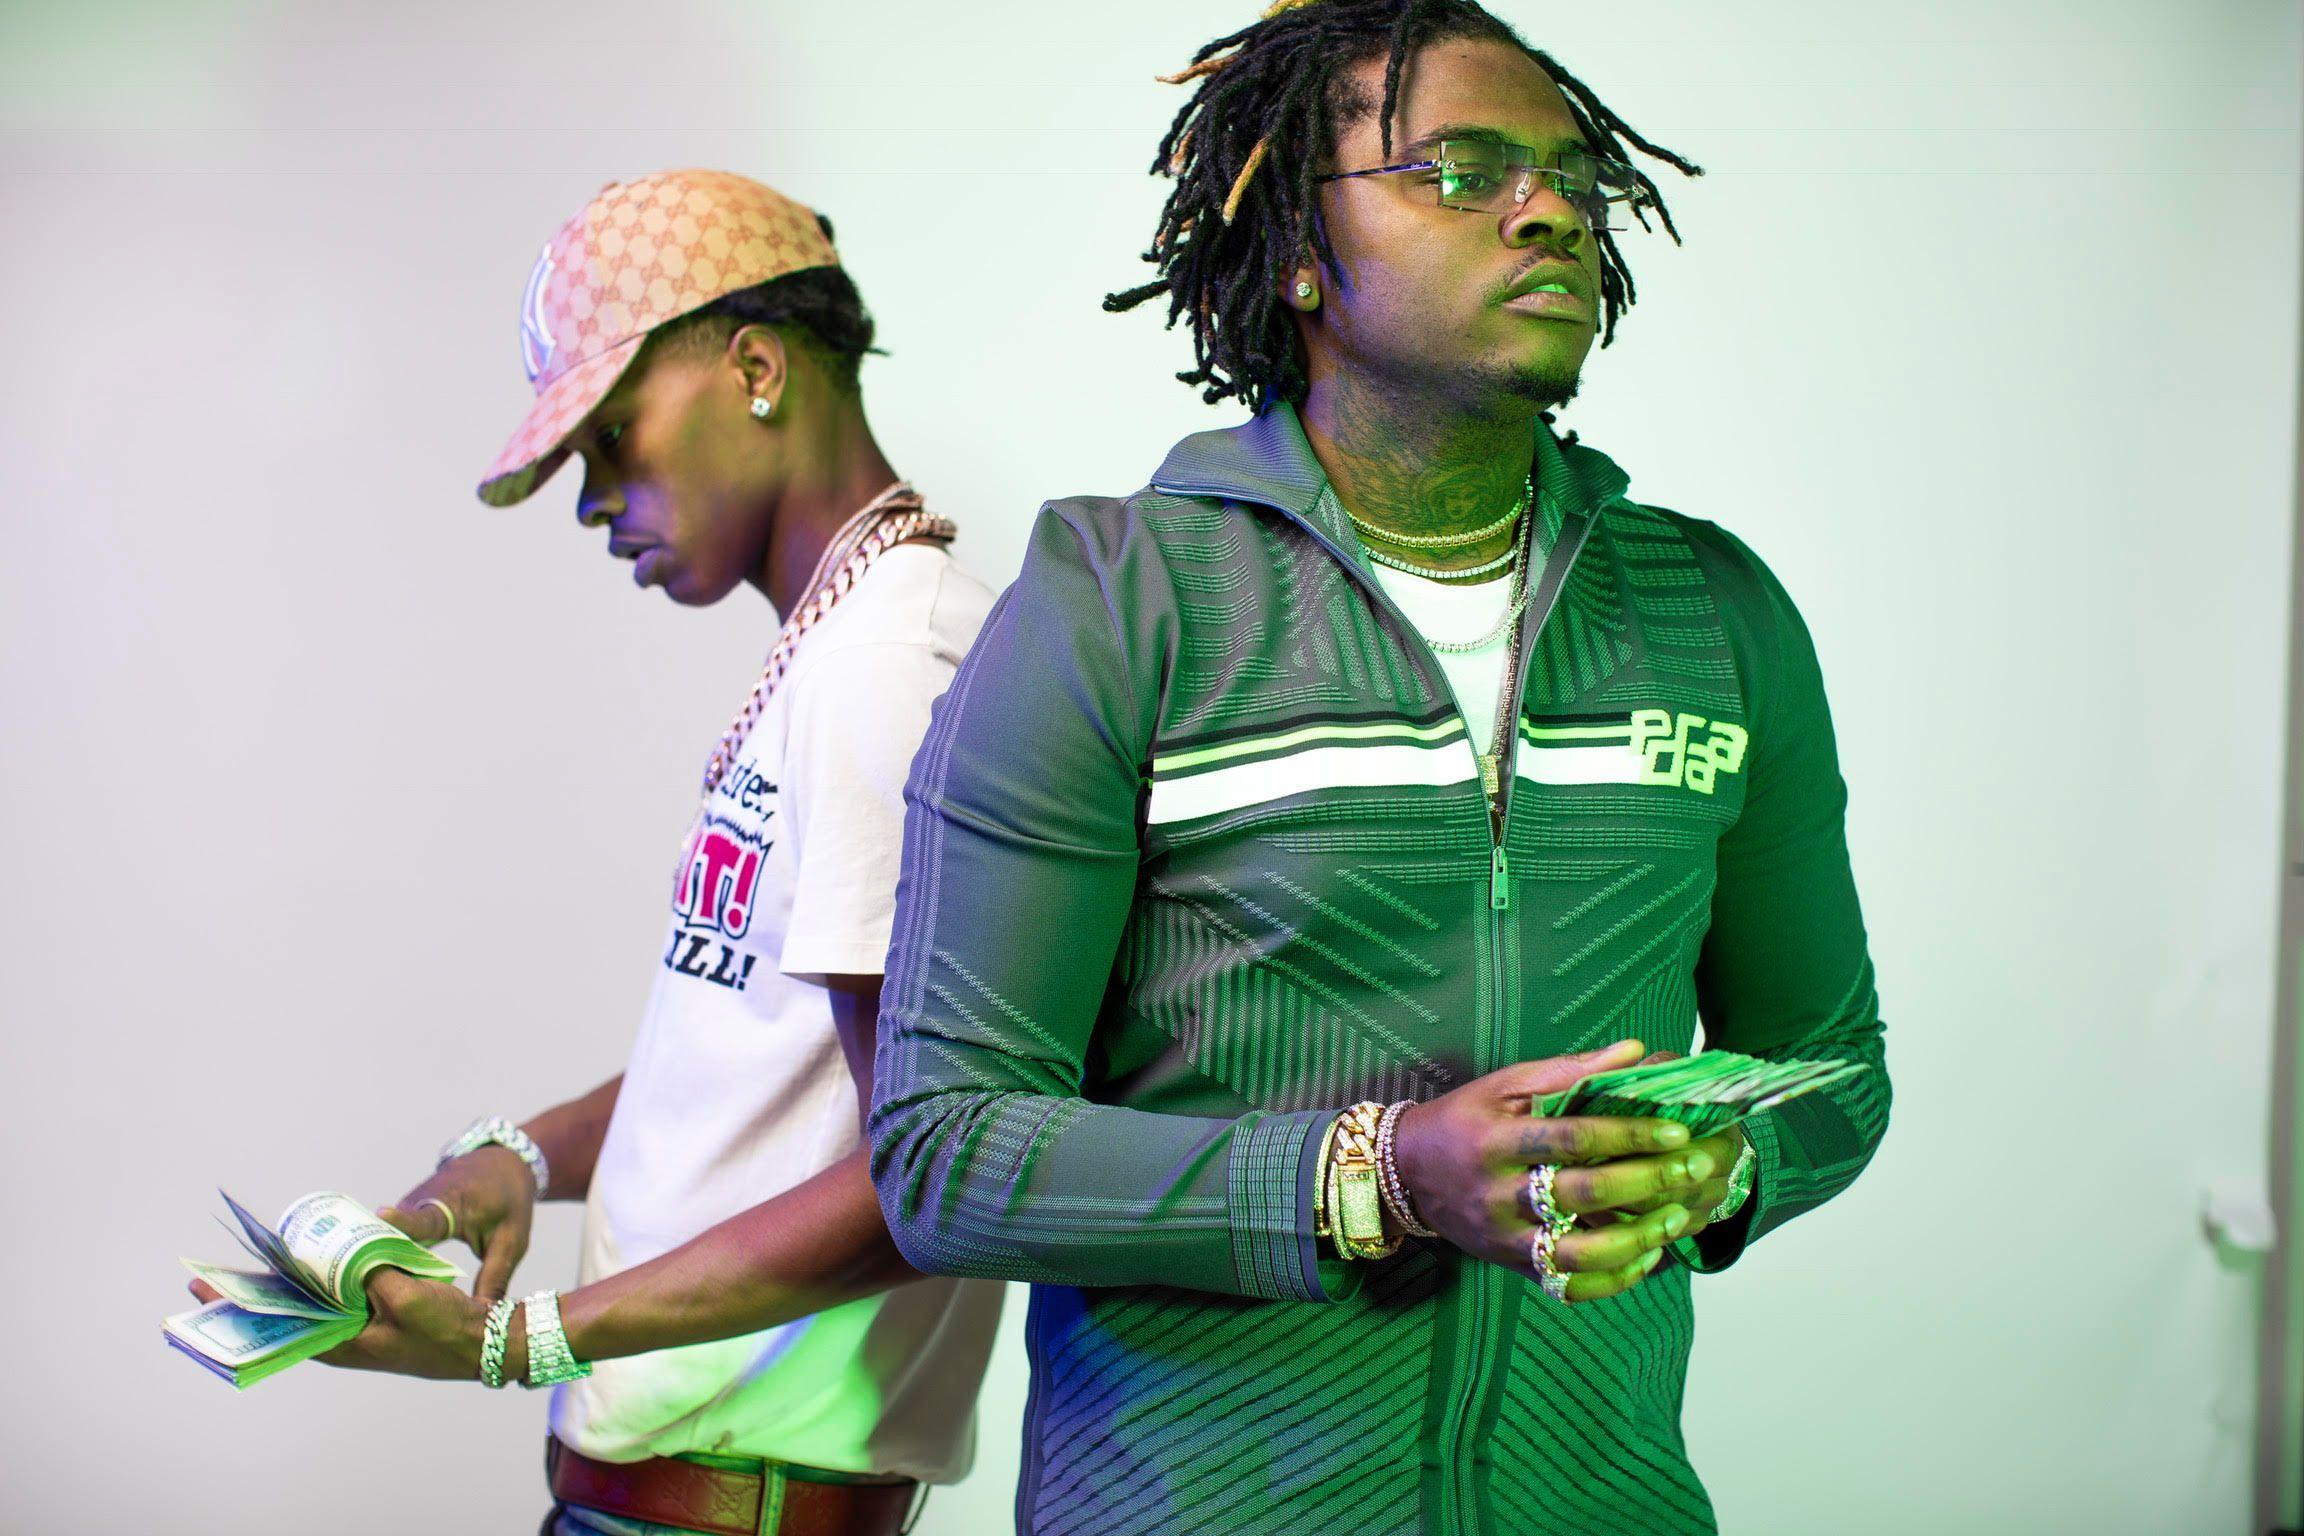 Gunna Taught Lil Baby How to Rap. Now, They're the Best Duo of 2018